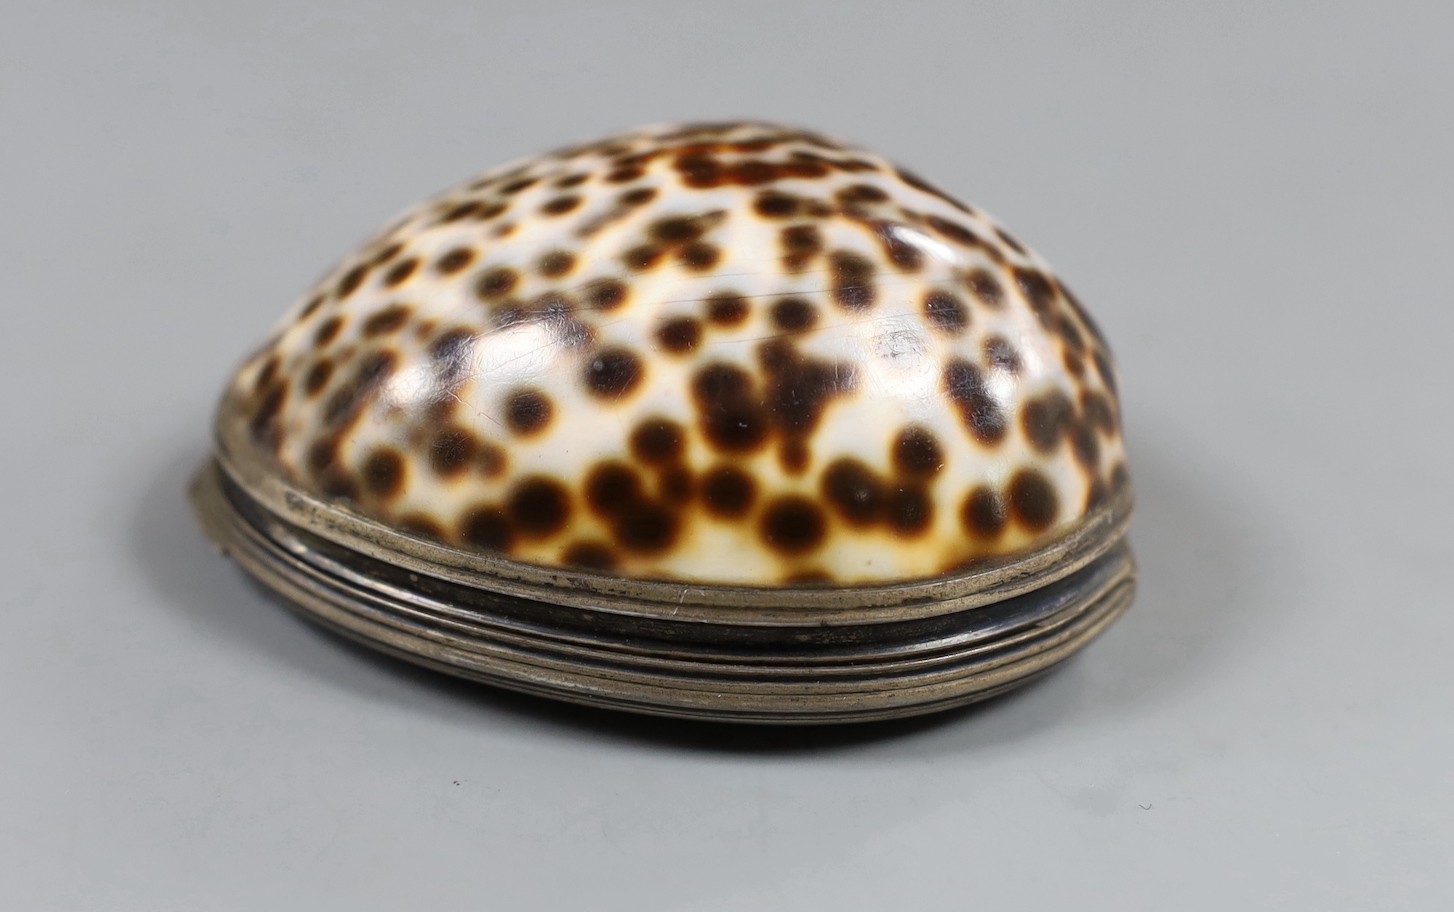 A late 18th/early 19th century white metal mounted cowrie shell snuff box, maker's mark only EC, 71mm.